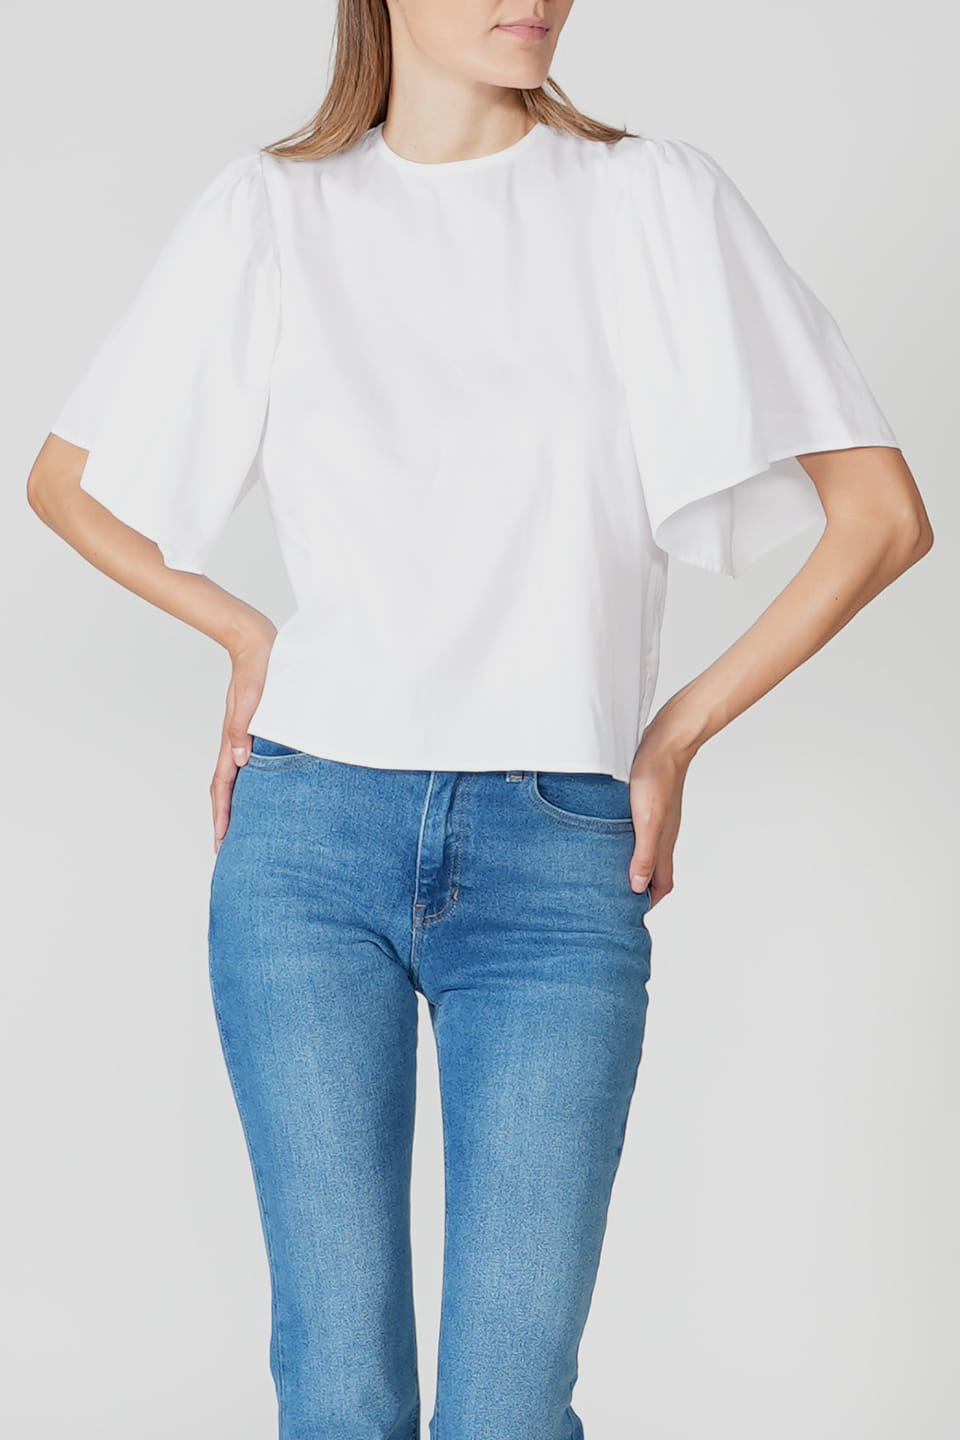 Shop online trendy White Women short sleeve from Federica Tosi Fashion designer. Product gallery 1